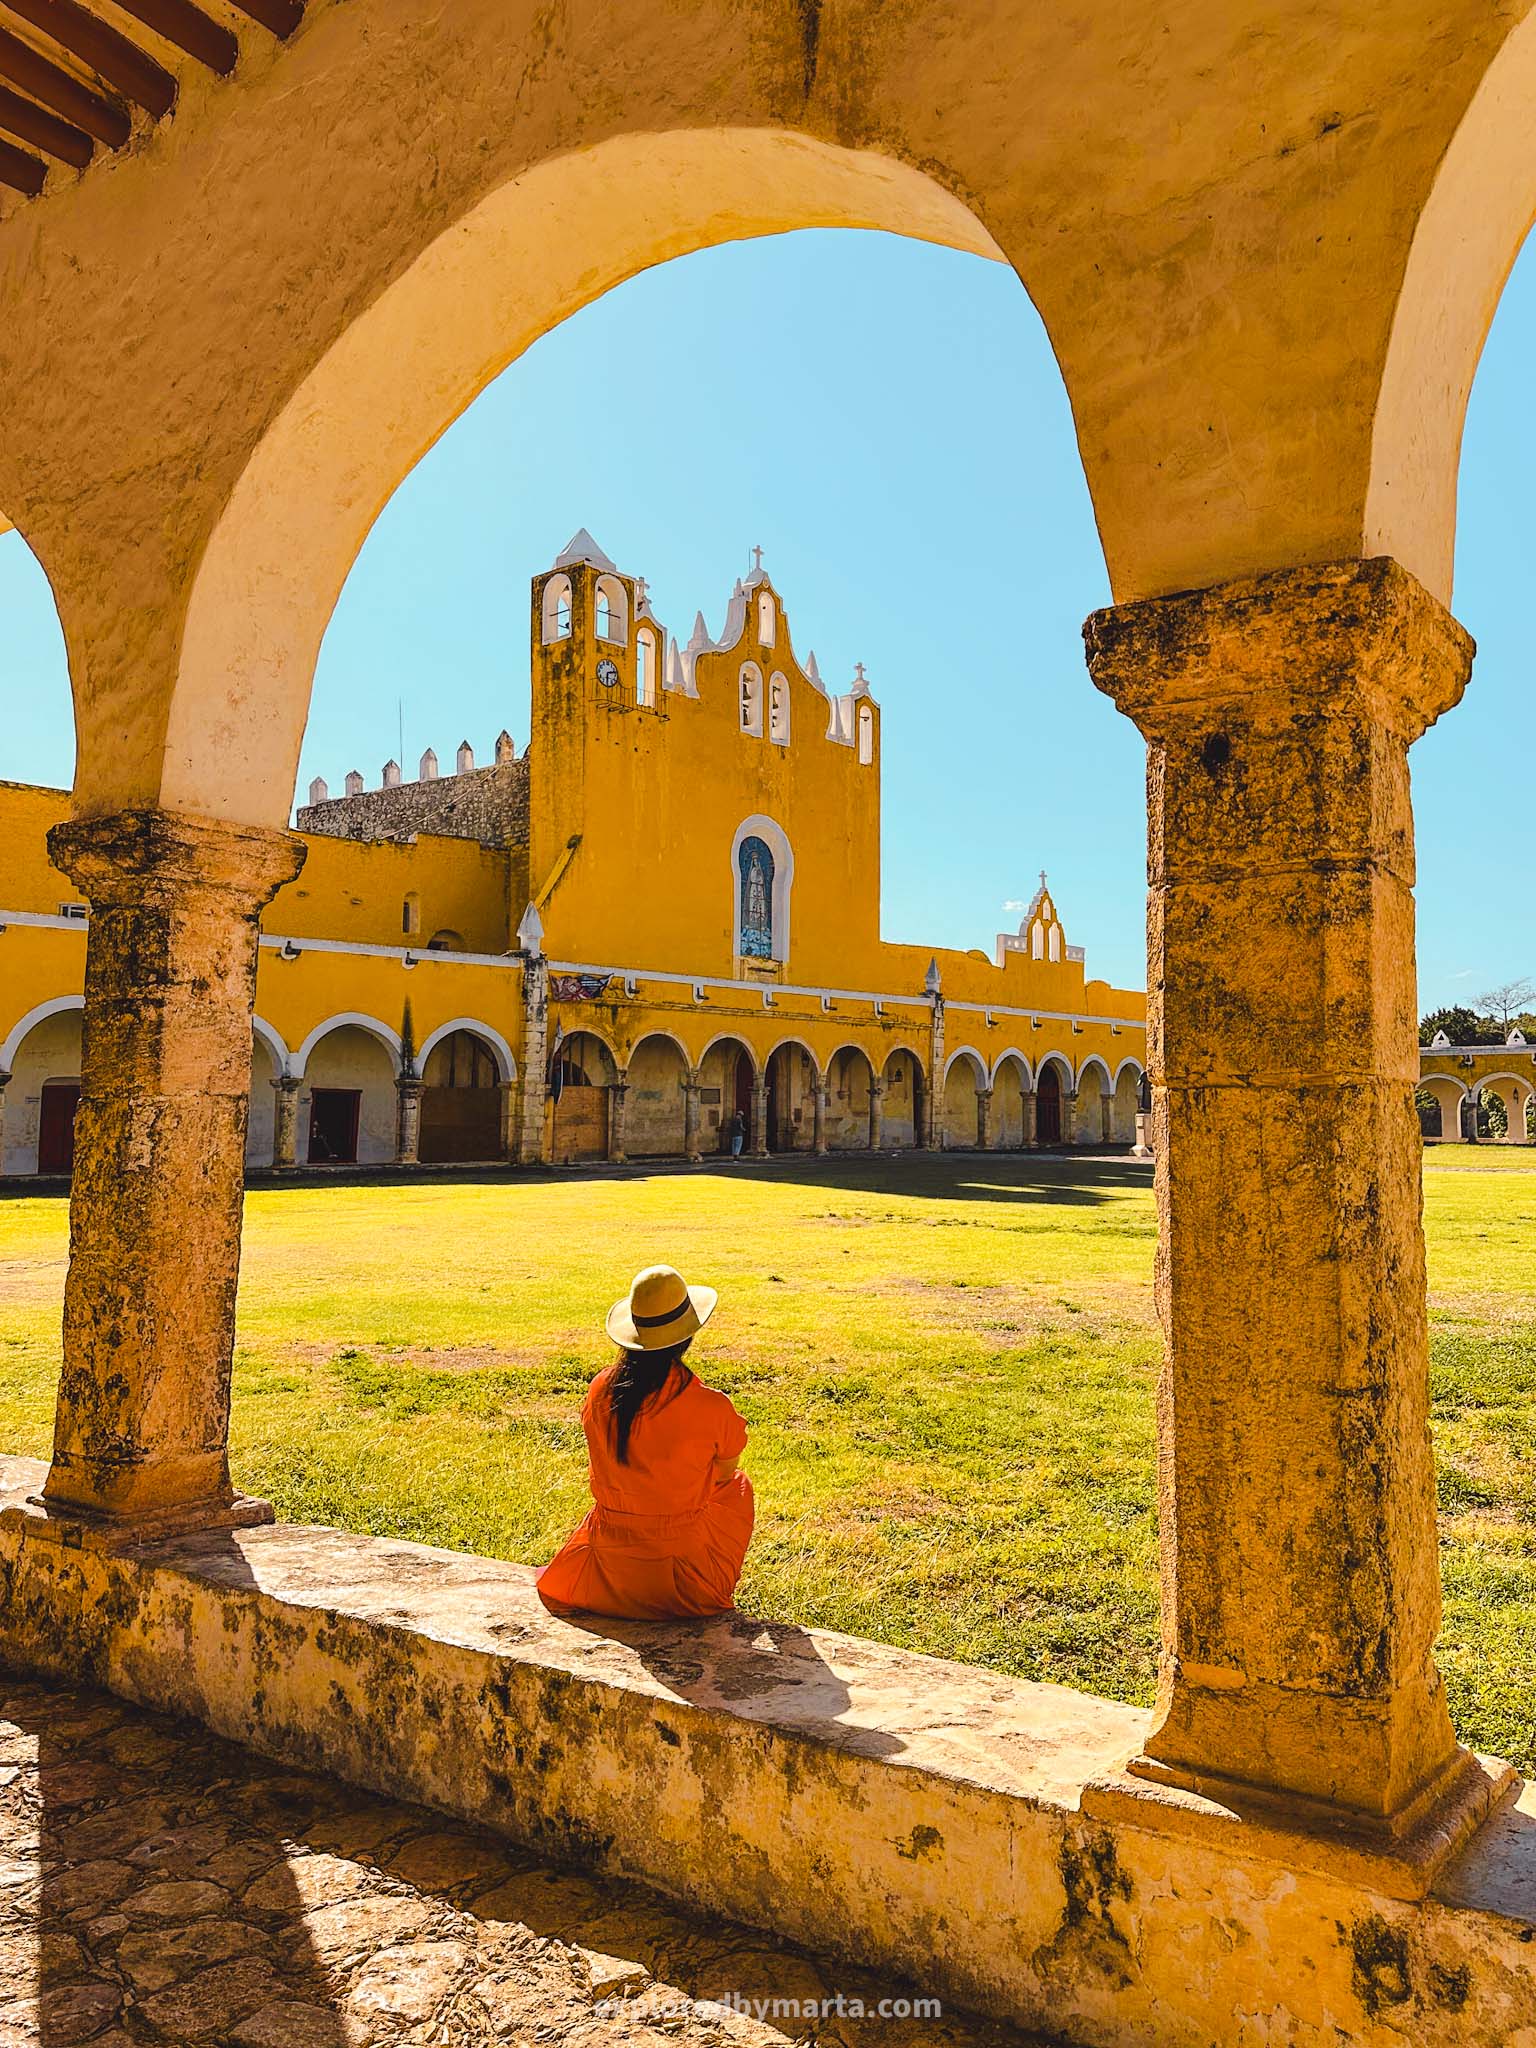 Izamal, Mexico-the yellow Convento de San Antonio convent hosts the second largest atrium in the world - a grass-covered square surrounded by a beautiful arcade